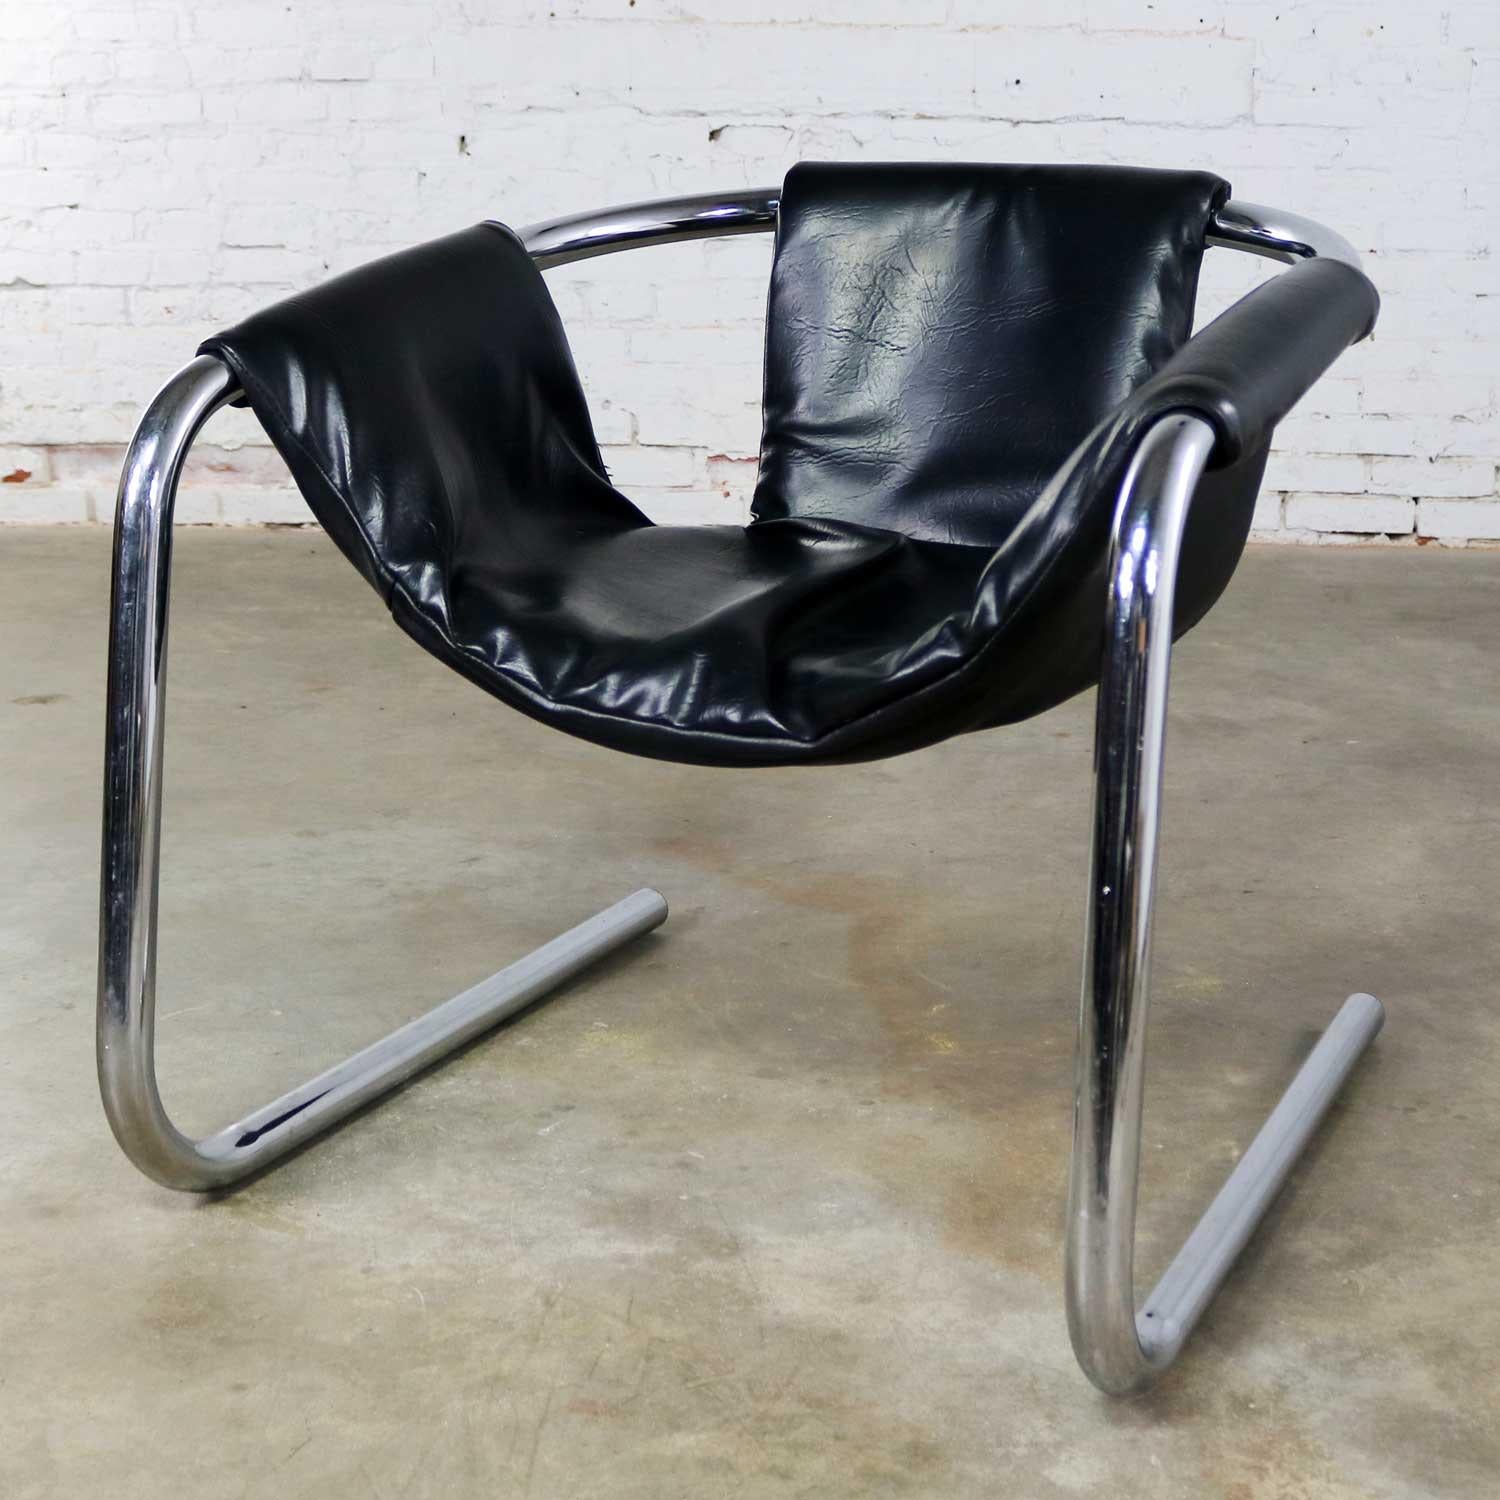 Handsome chrome and black vinyl cantilevered sling chair attributed to Vecta Group of Italy and called the Zermatt chair. This chair is in wonderful vintage condition overall. The chrome is very good but not without a small amount of age appropriate